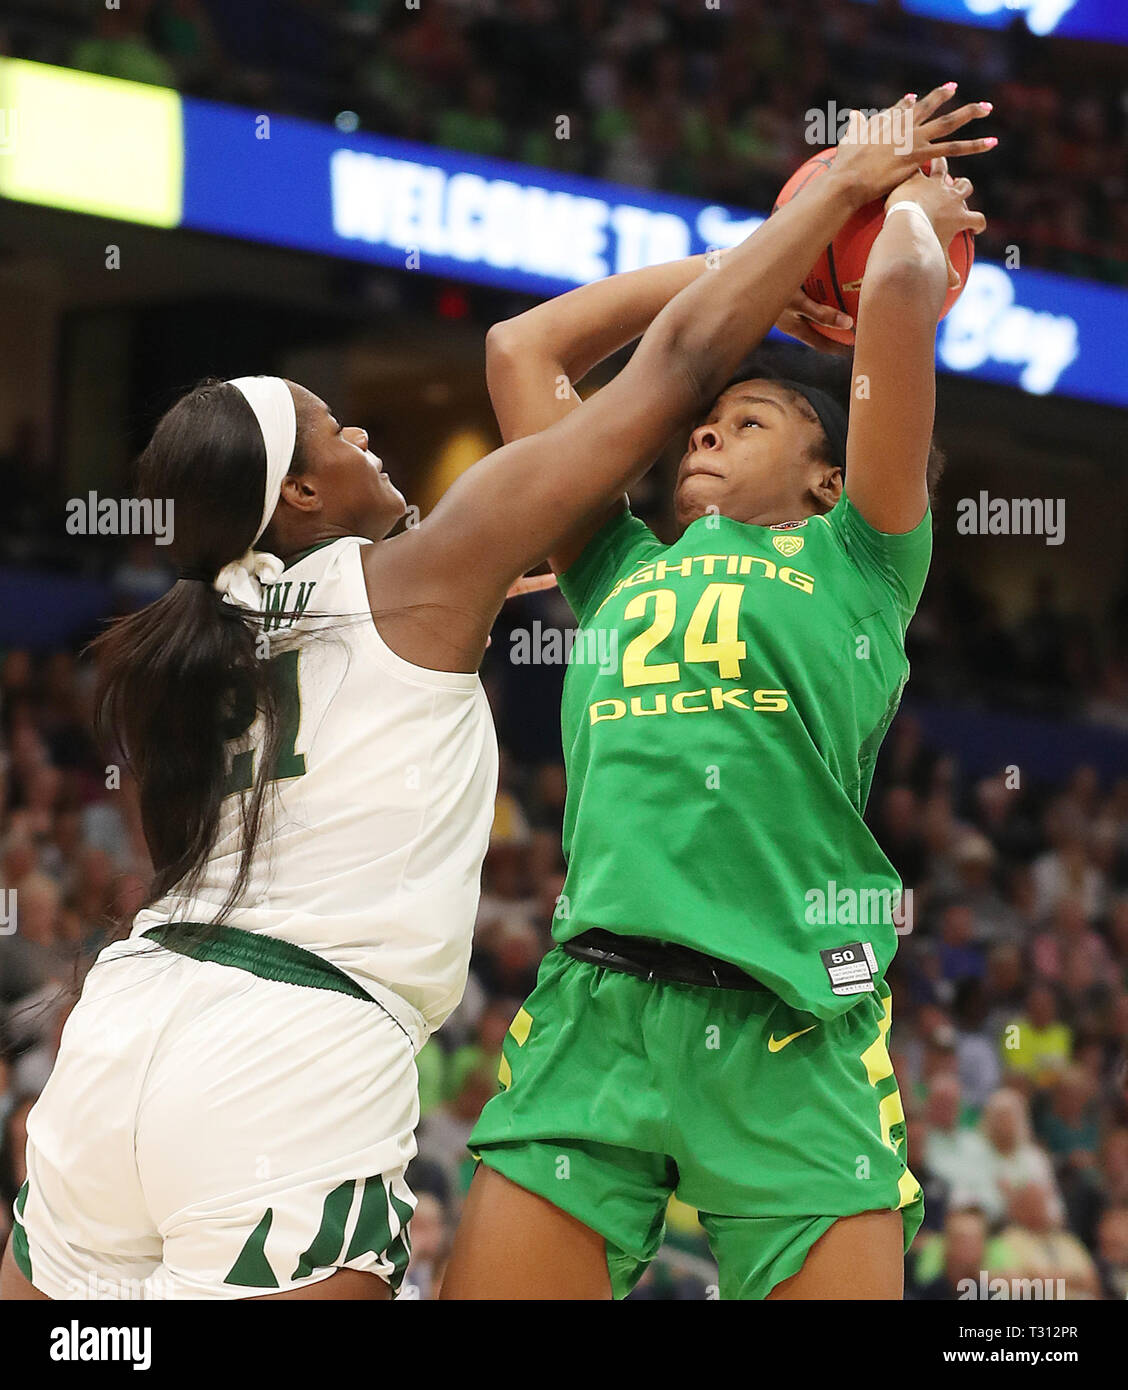 City, Florida, USA. 5th Apr, 2019. MONICA HERNDON | Times .Baylor Lady Bears guard Juicy Landrum (20) blocks the shot of Oregon Ducks forward Ruthy Hebard (24) during the first half in the NCAA Women's Final Four semifinal game at the Amalie Arena on Friday, April 5, 2019. Credit: Monica Herndon/Tampa Bay Times/ZUMA Wire/Alamy Live News Stock Photo